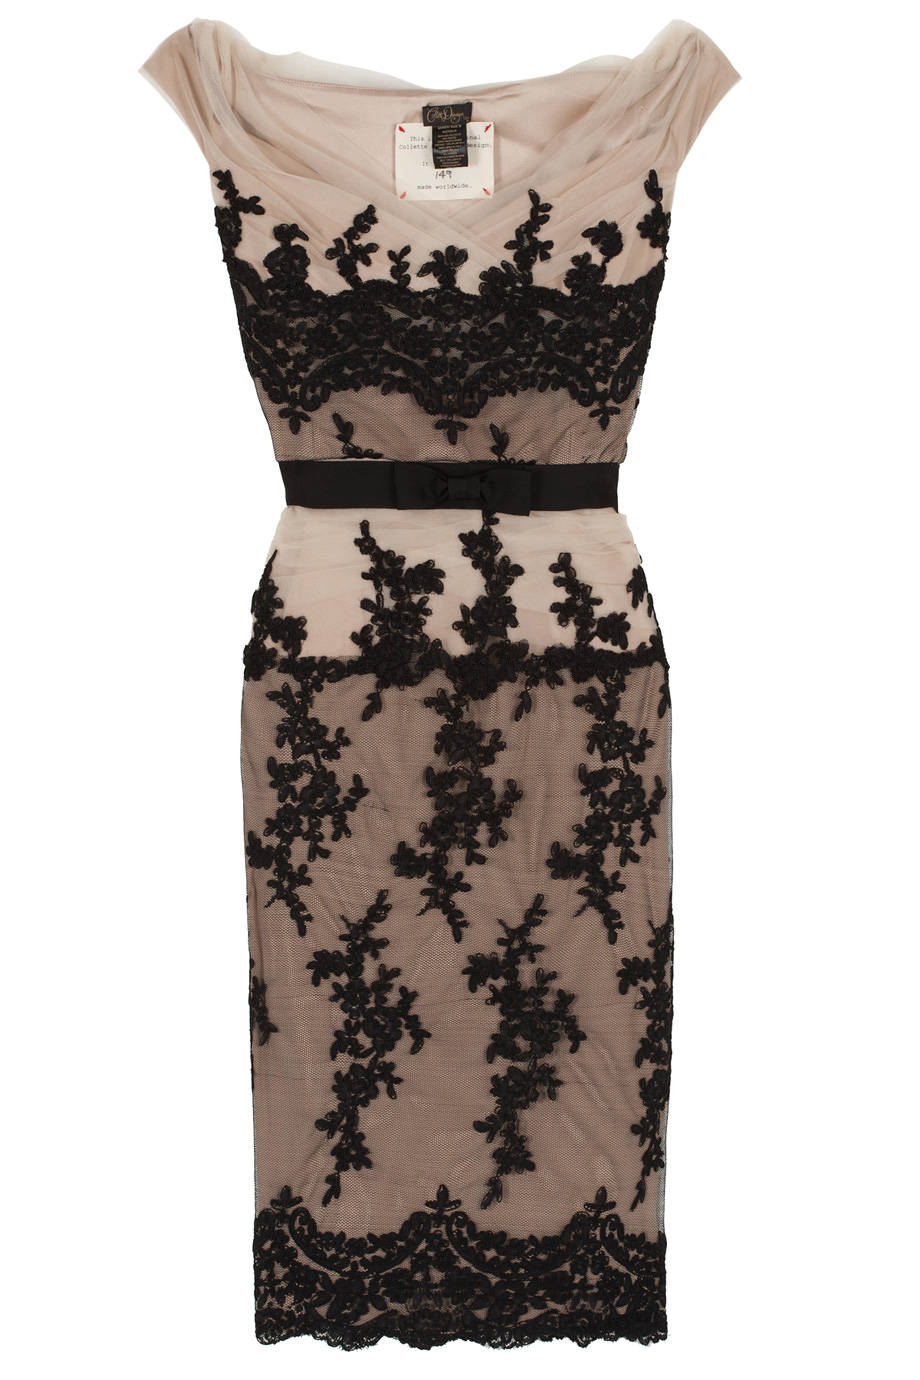 Lyst - Collette Dinnigan Mirabella Lace Cocktail Dress in Black